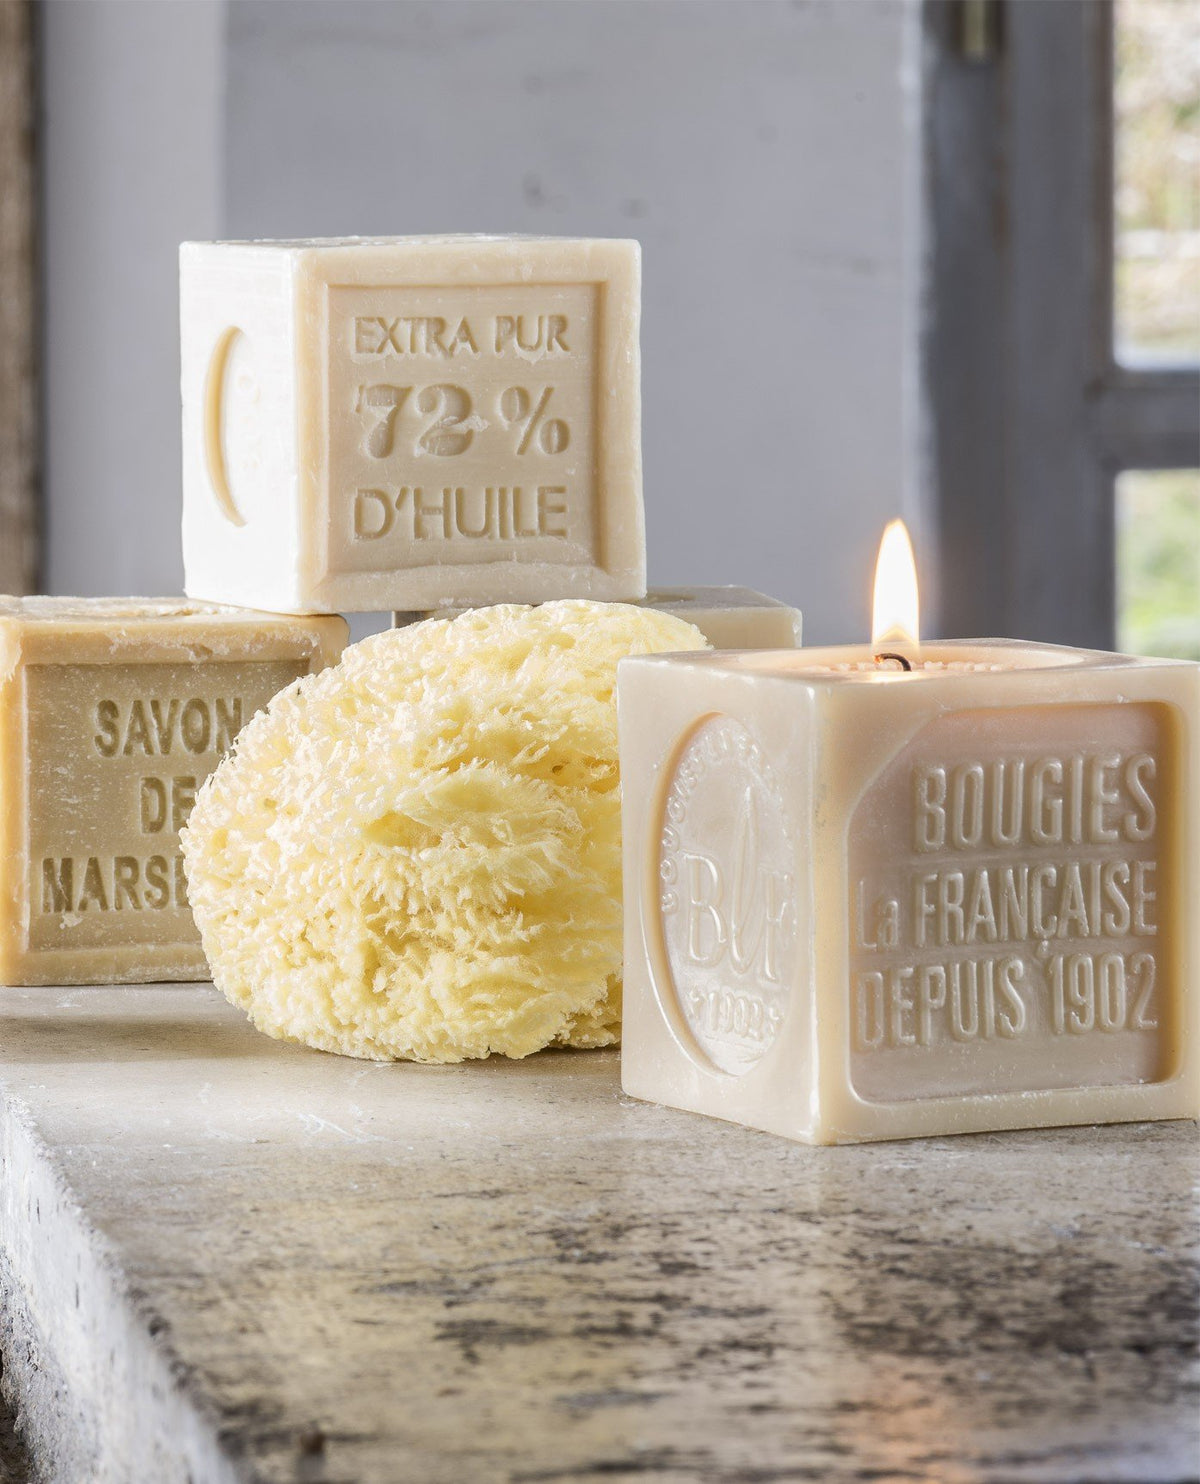 Lit Bougies la Française decorative candle next to bars of Marseille soap and a natural sponge on a stone windowsill, with a garden view in the background.